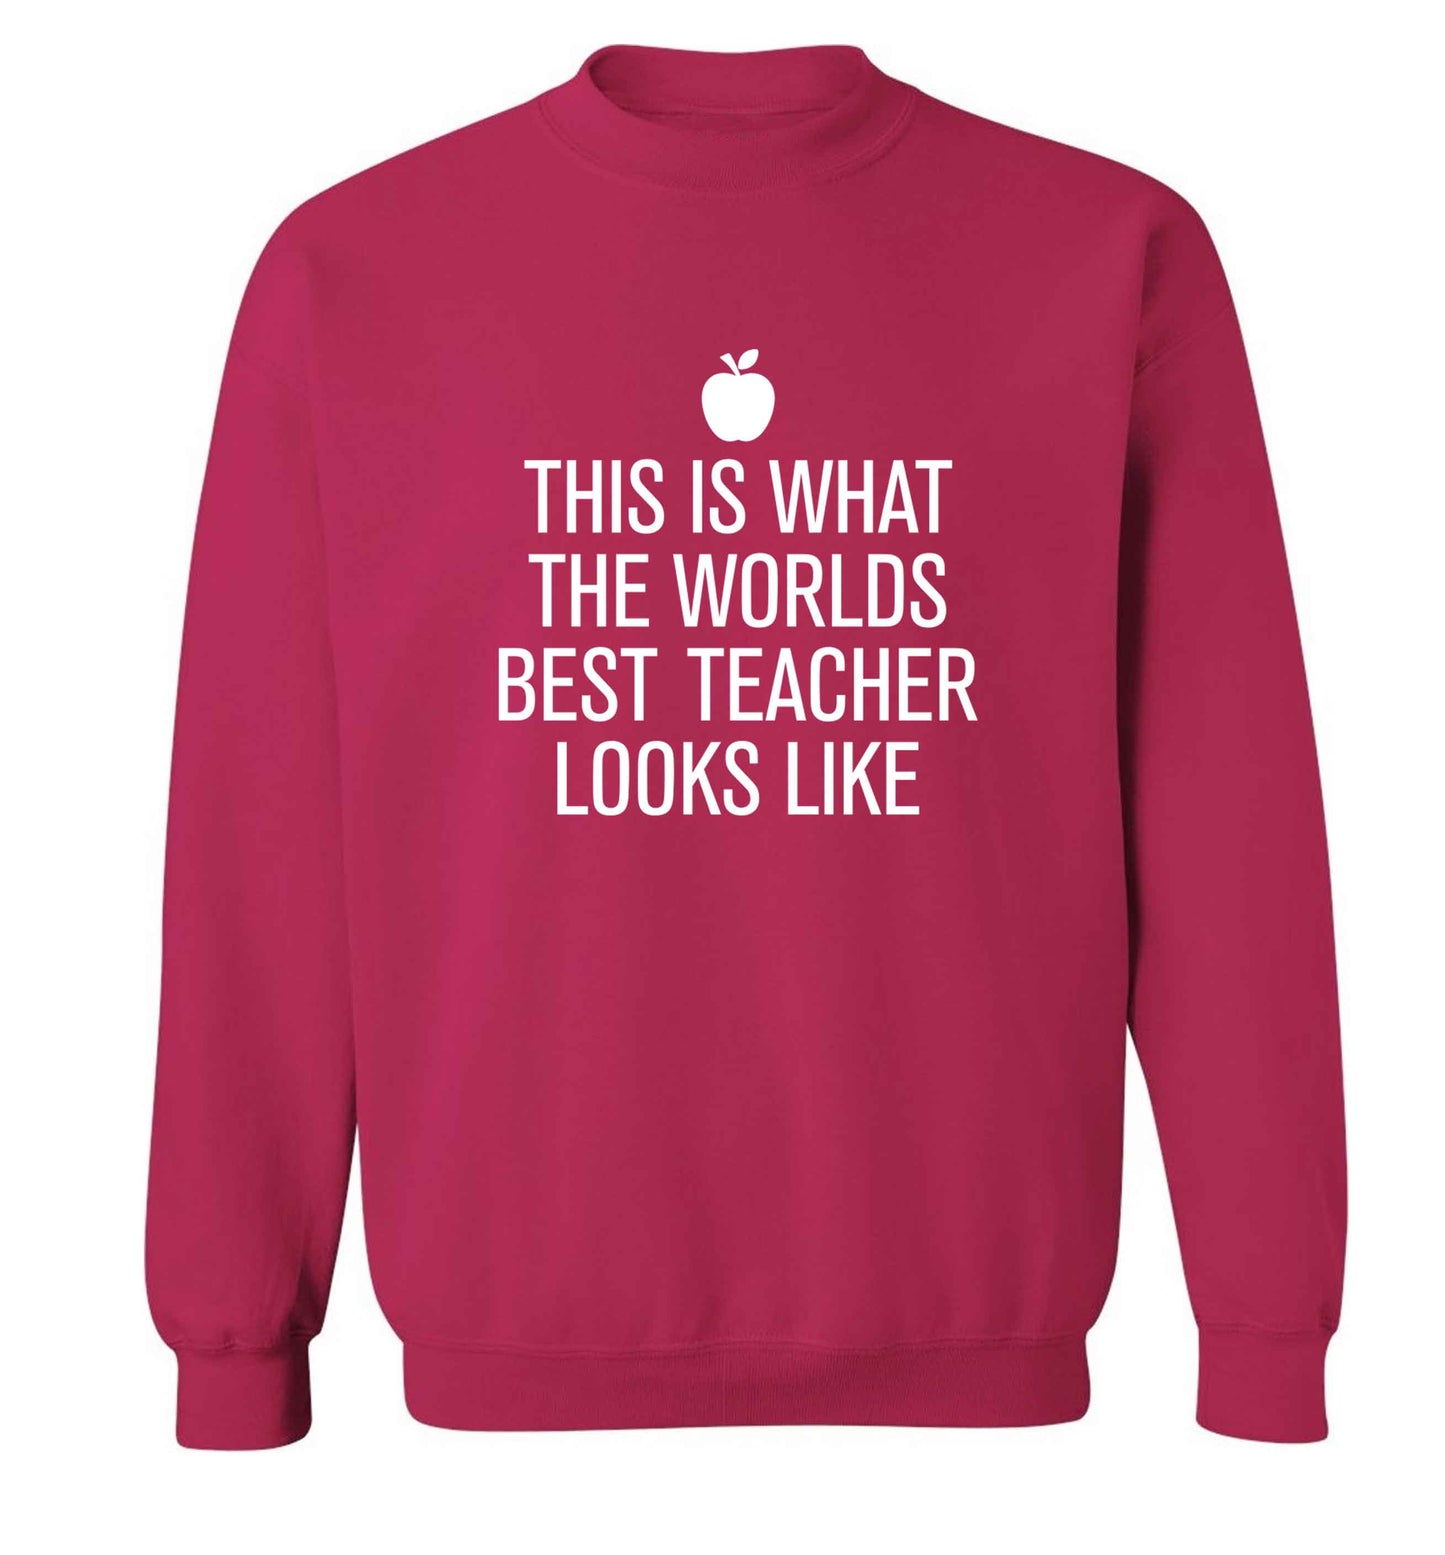 This is what the worlds best teacher looks like adult's unisex pink sweater 2XL